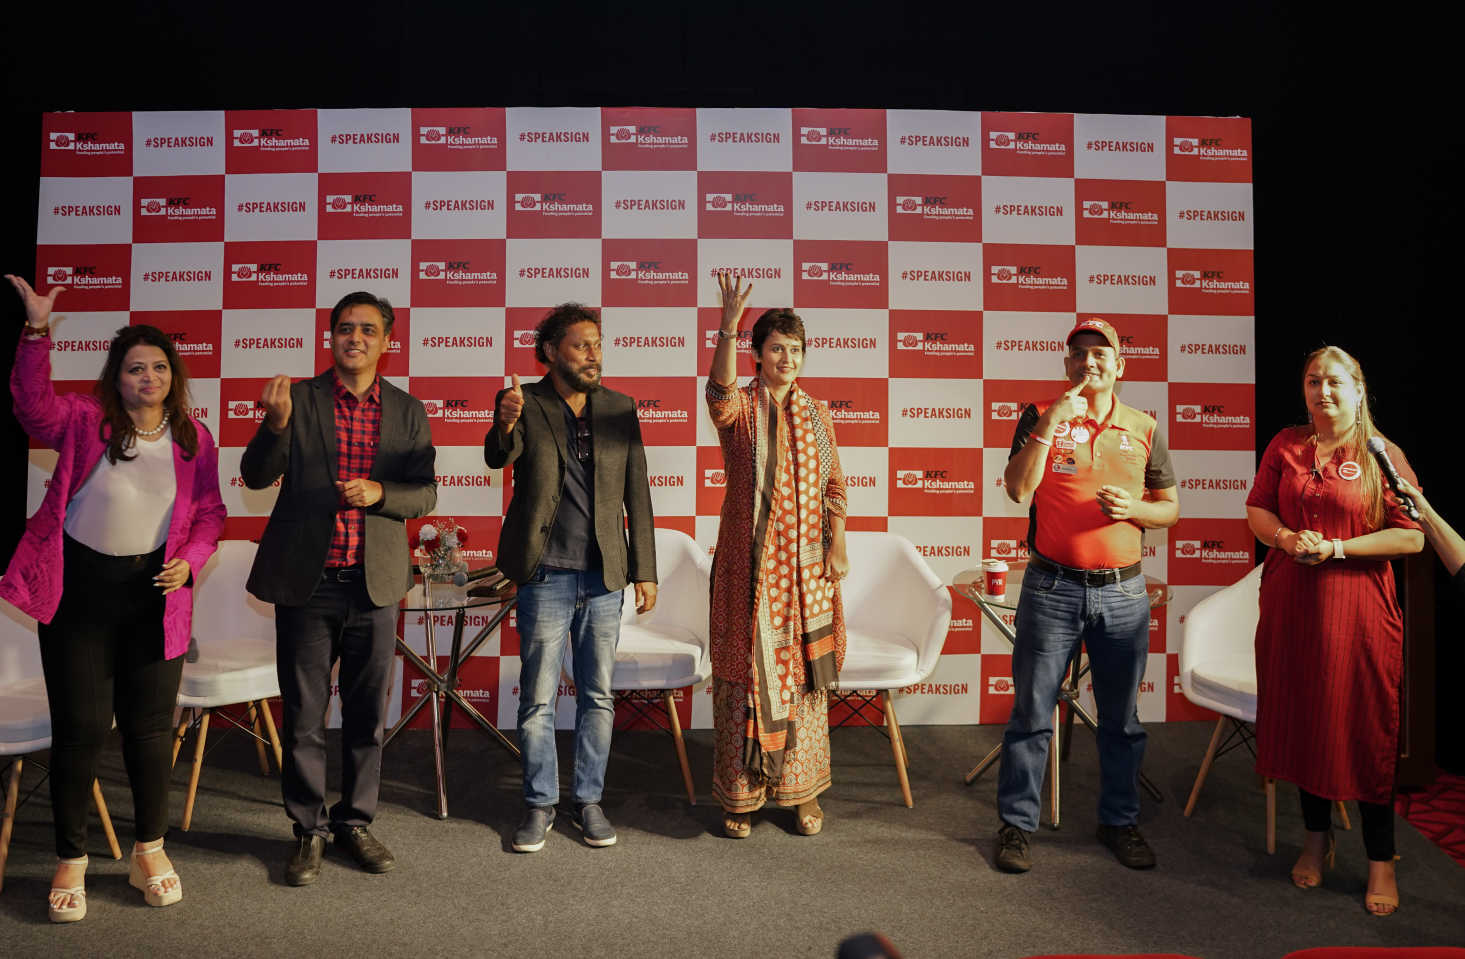 First edition of KFC presents Loco India Gaming Awards by IWMBuzz